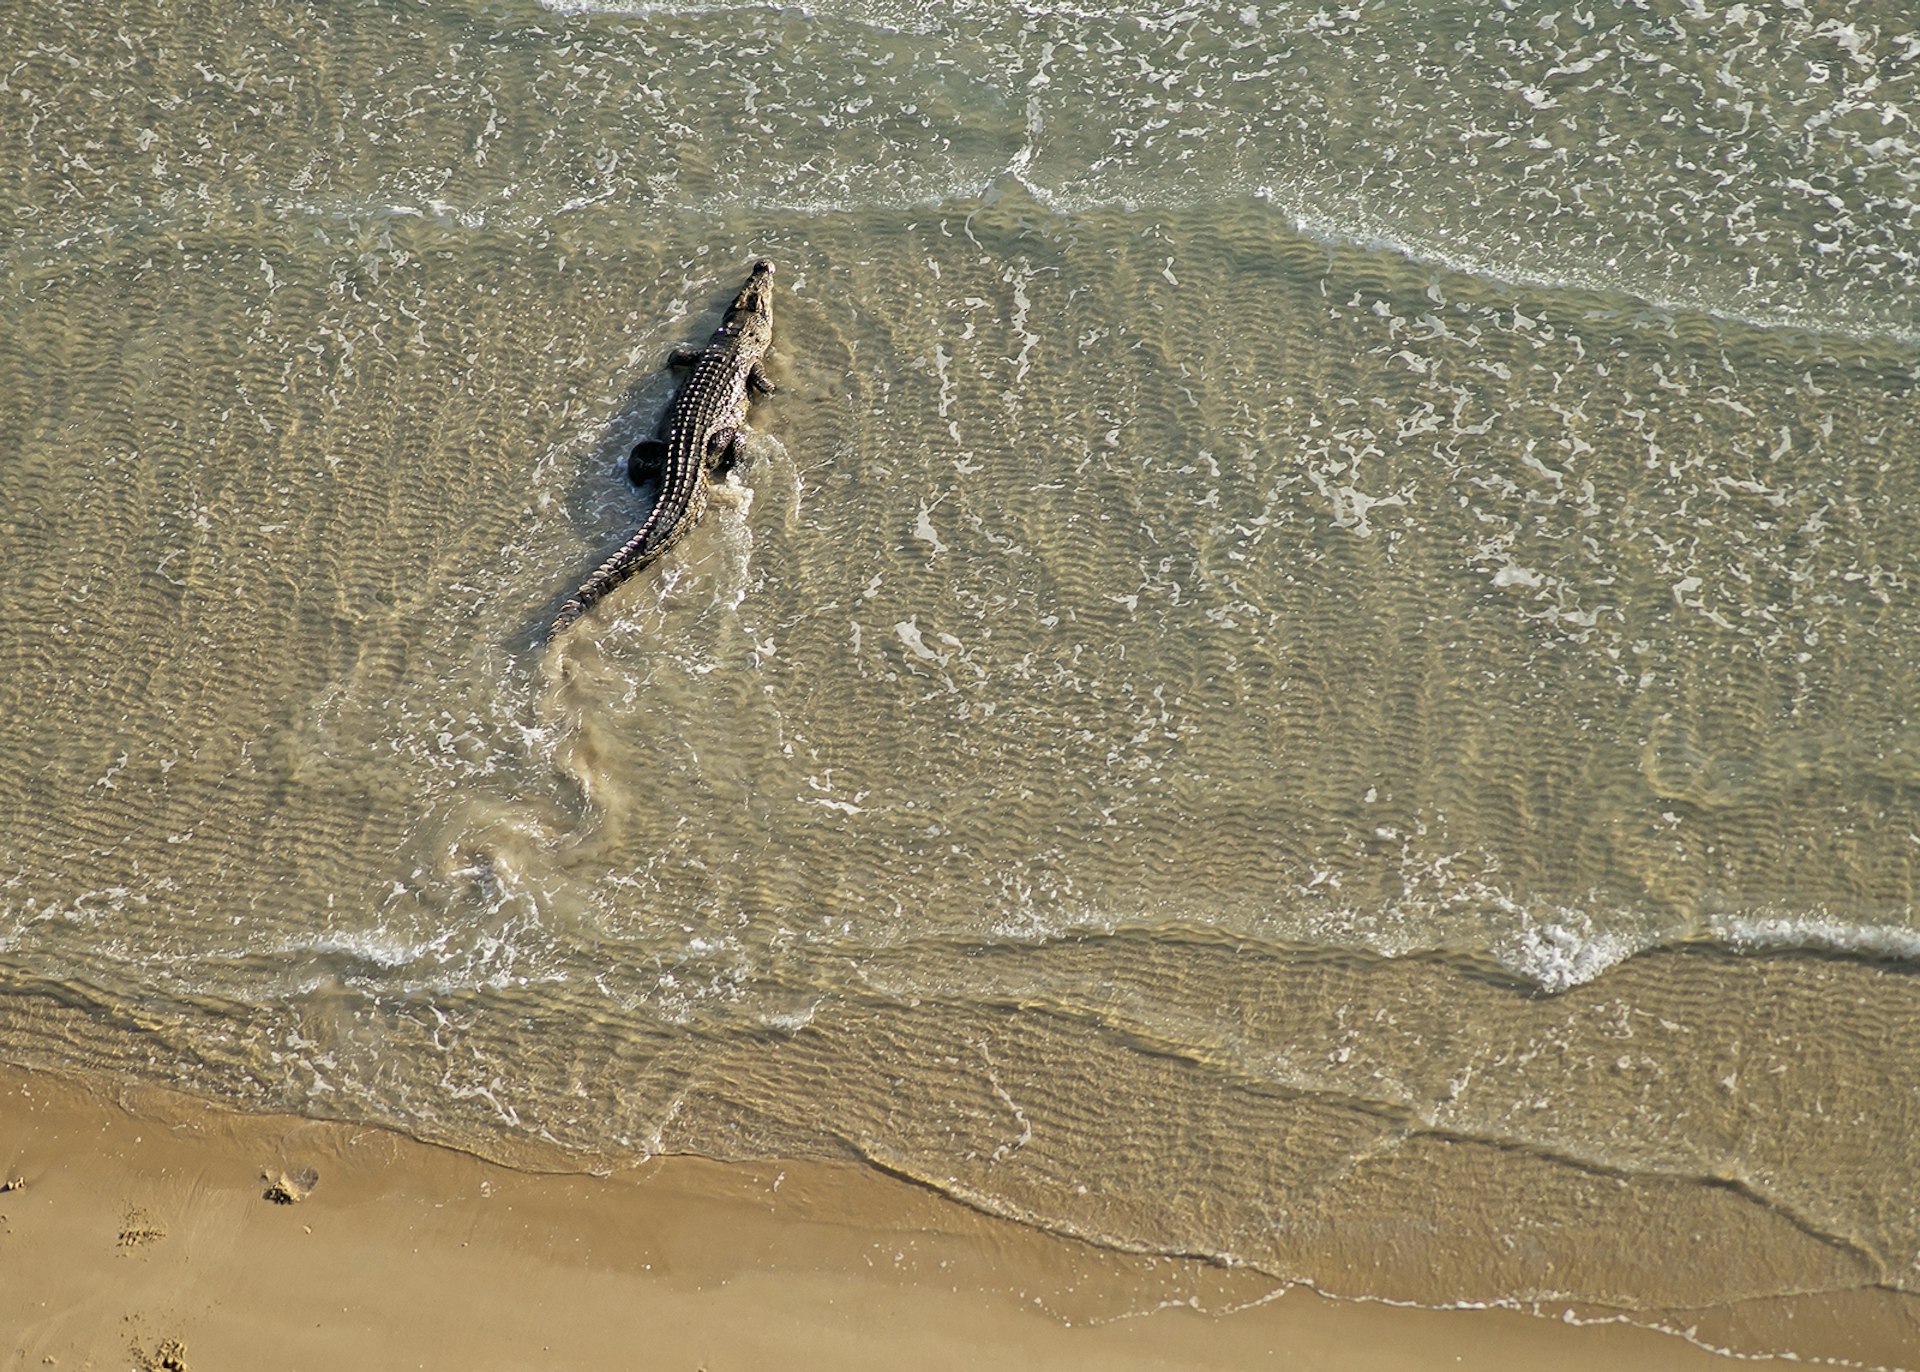 A saltwater crocodile seen from above as it enters the sea